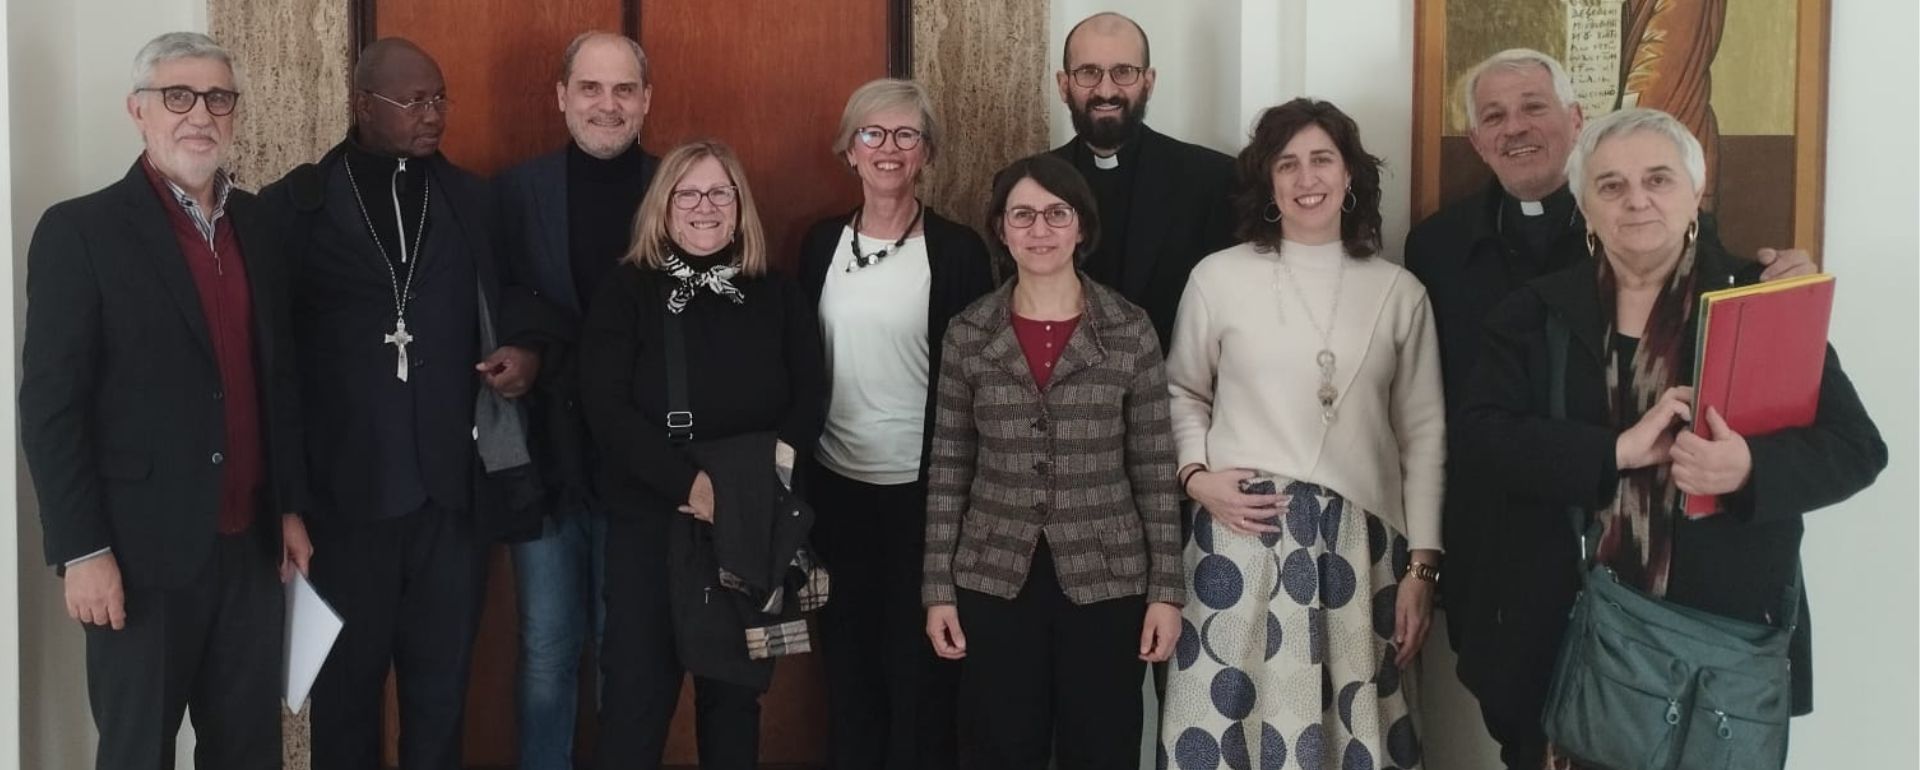 Meeting with Linda Ghisoni, Undersecretary for the Lay Faithful – Dicastery for Laity Family and Life